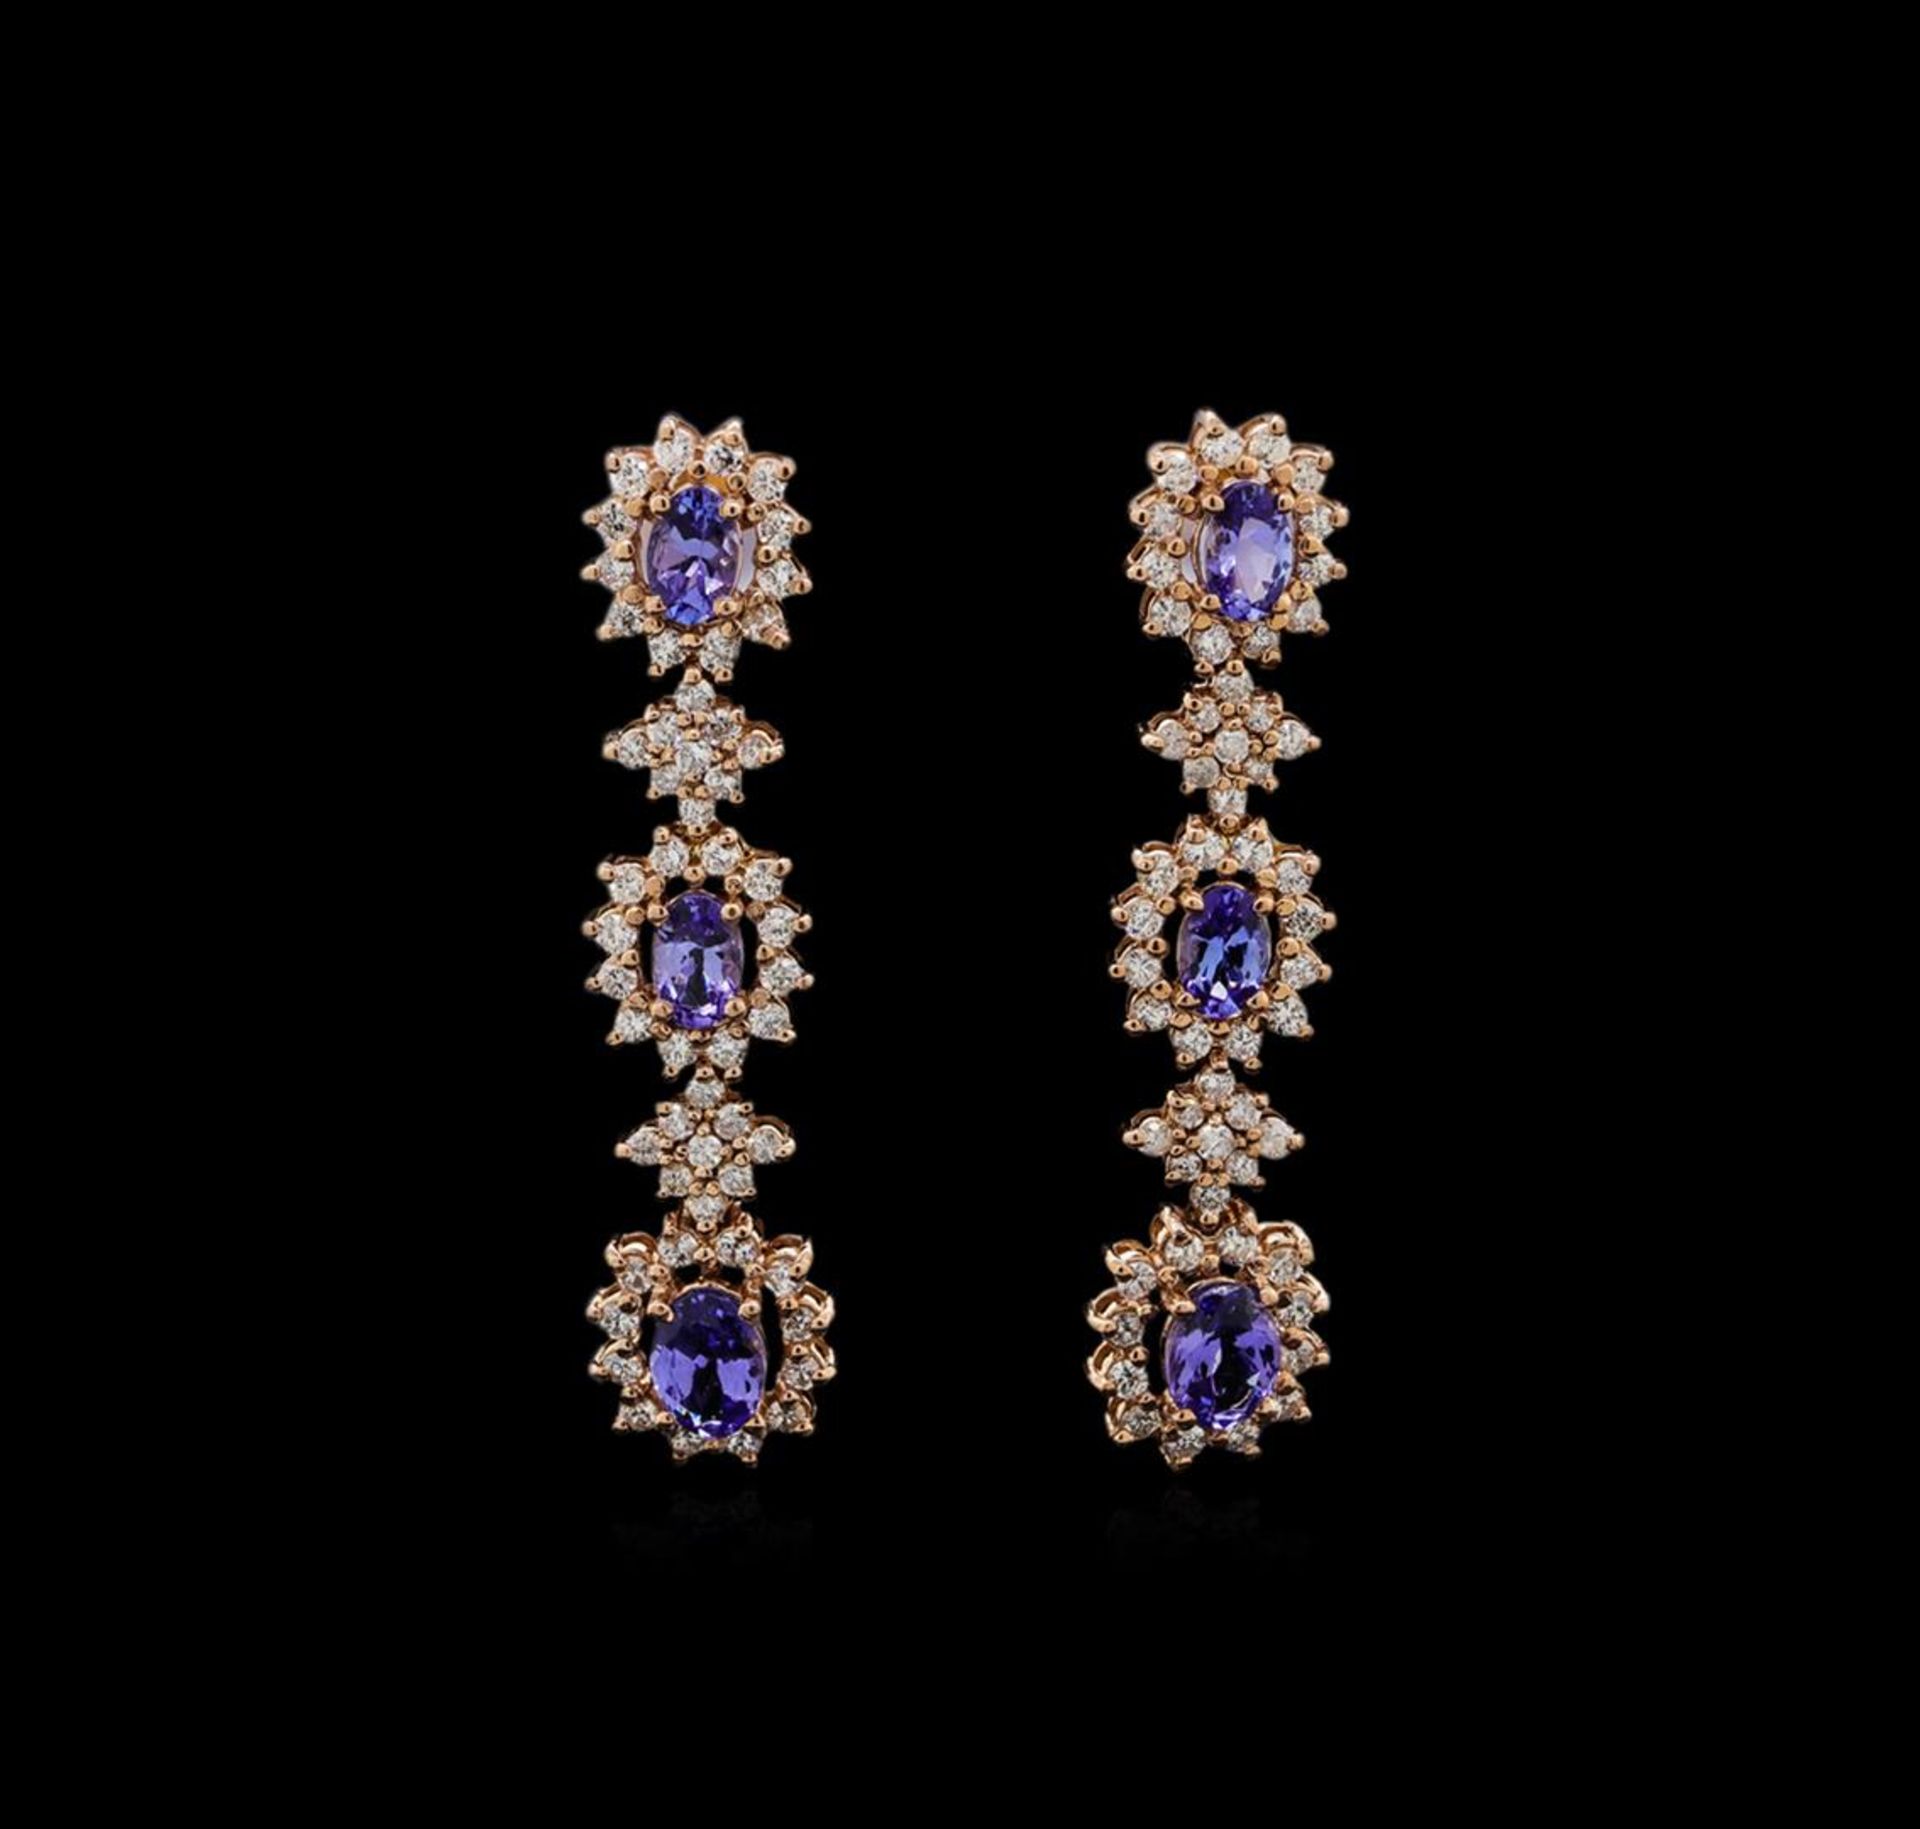 14KT Rose Gold 5.16 ctw Tanzanite and Diamond Earrings - Image 2 of 6